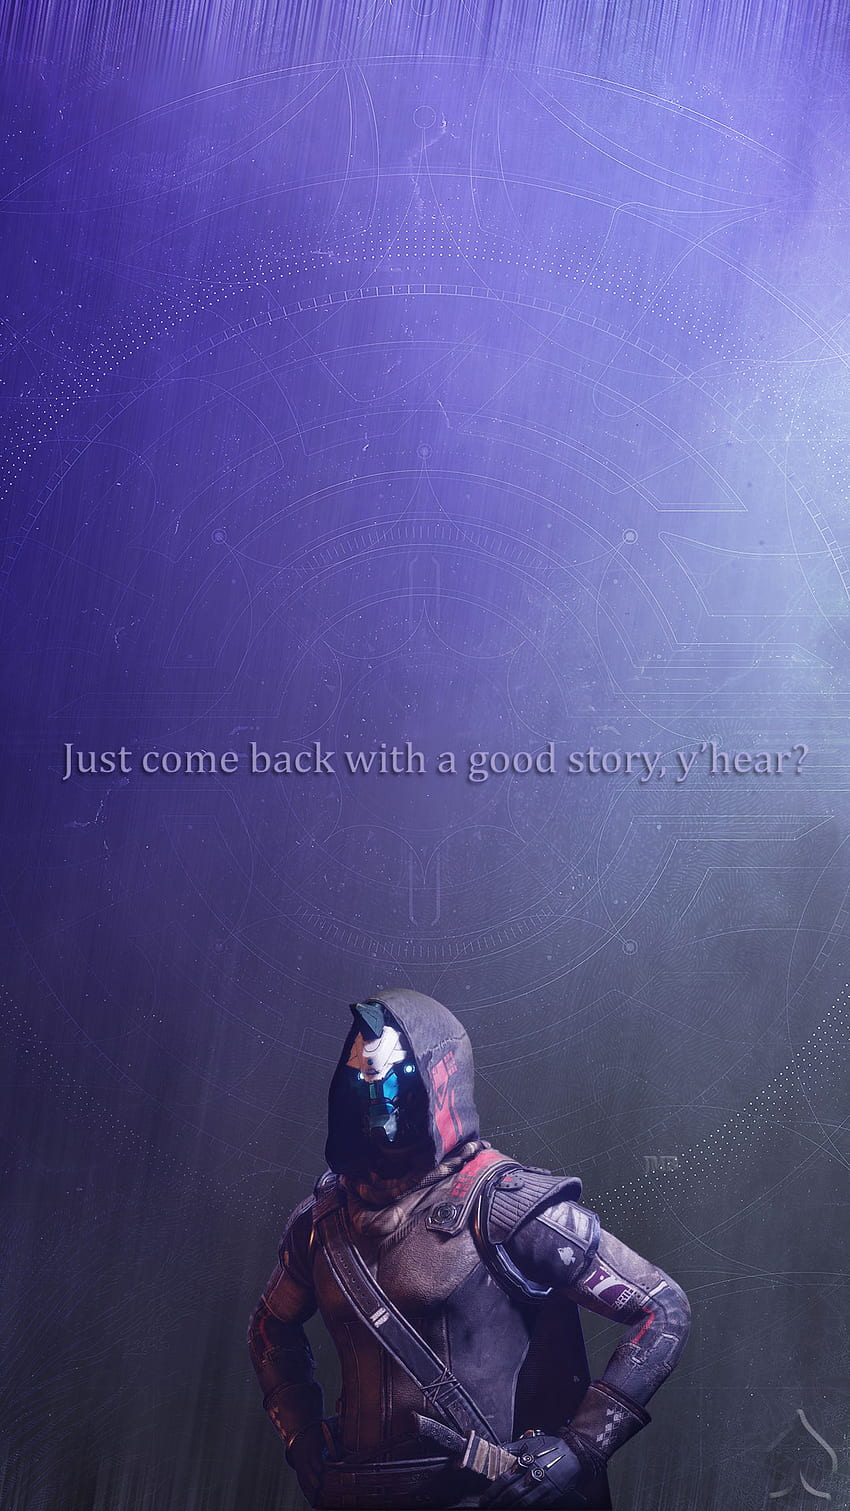 Made a nice phone wallpaper of Witch queen  rdestiny2